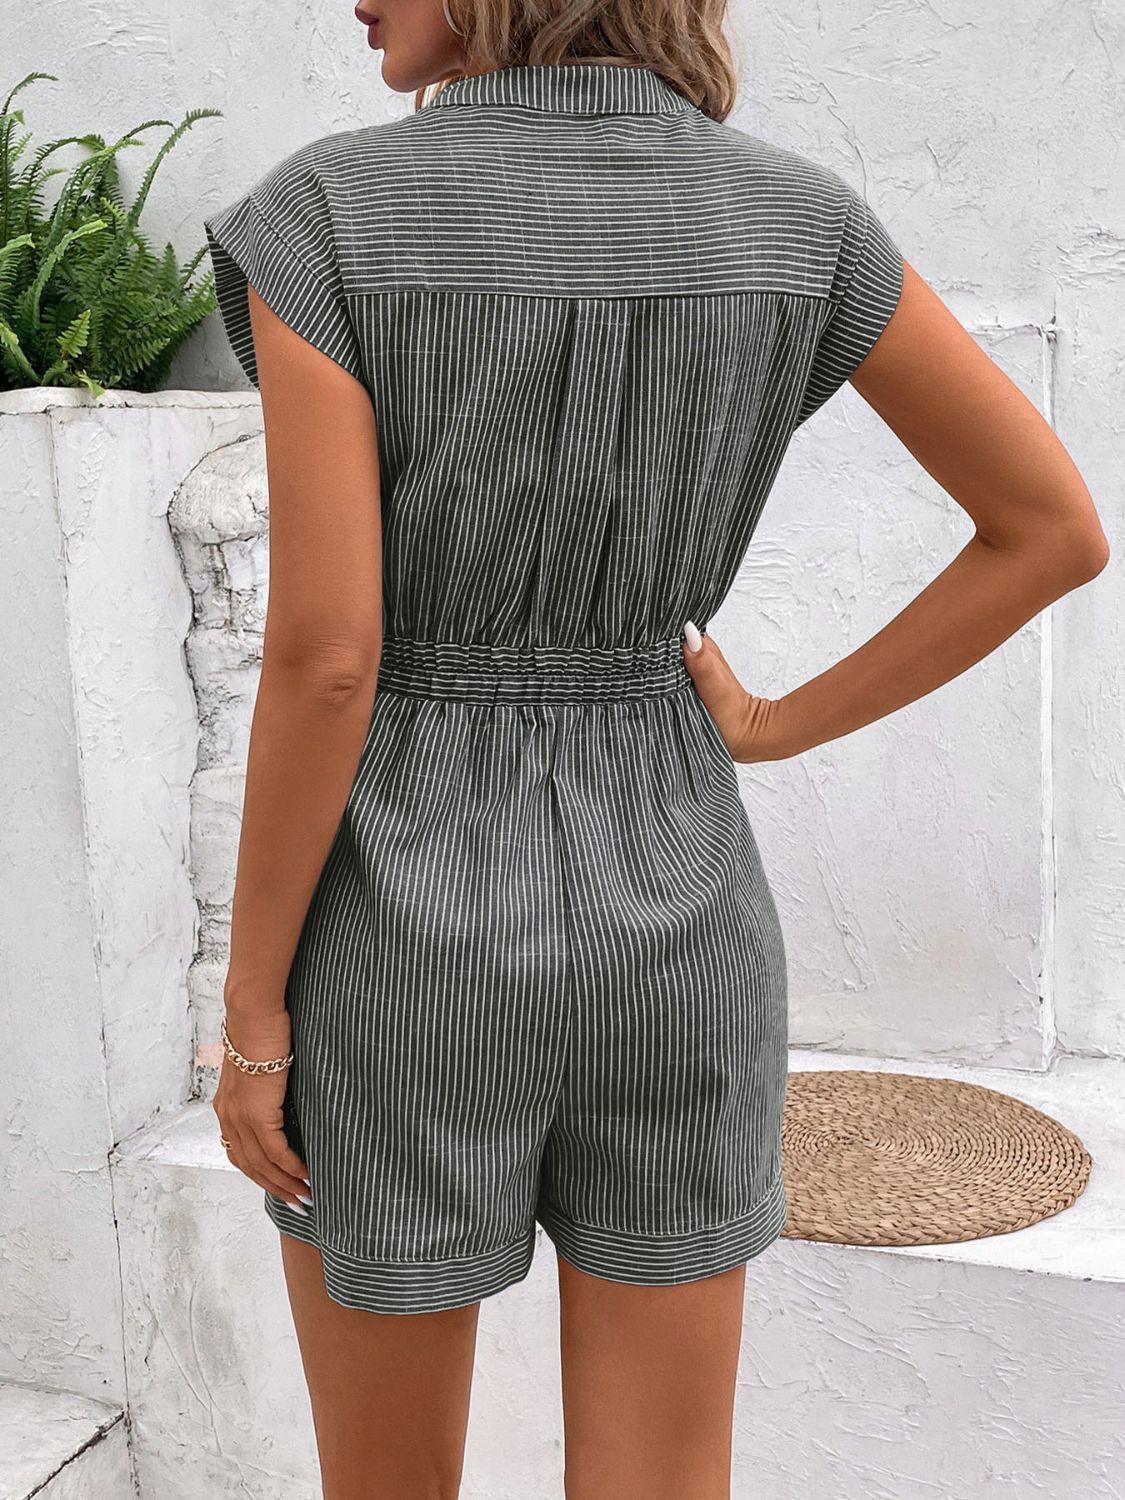 Women's Jumpsuits & Rompers Striped Notched Tie Waist Romper